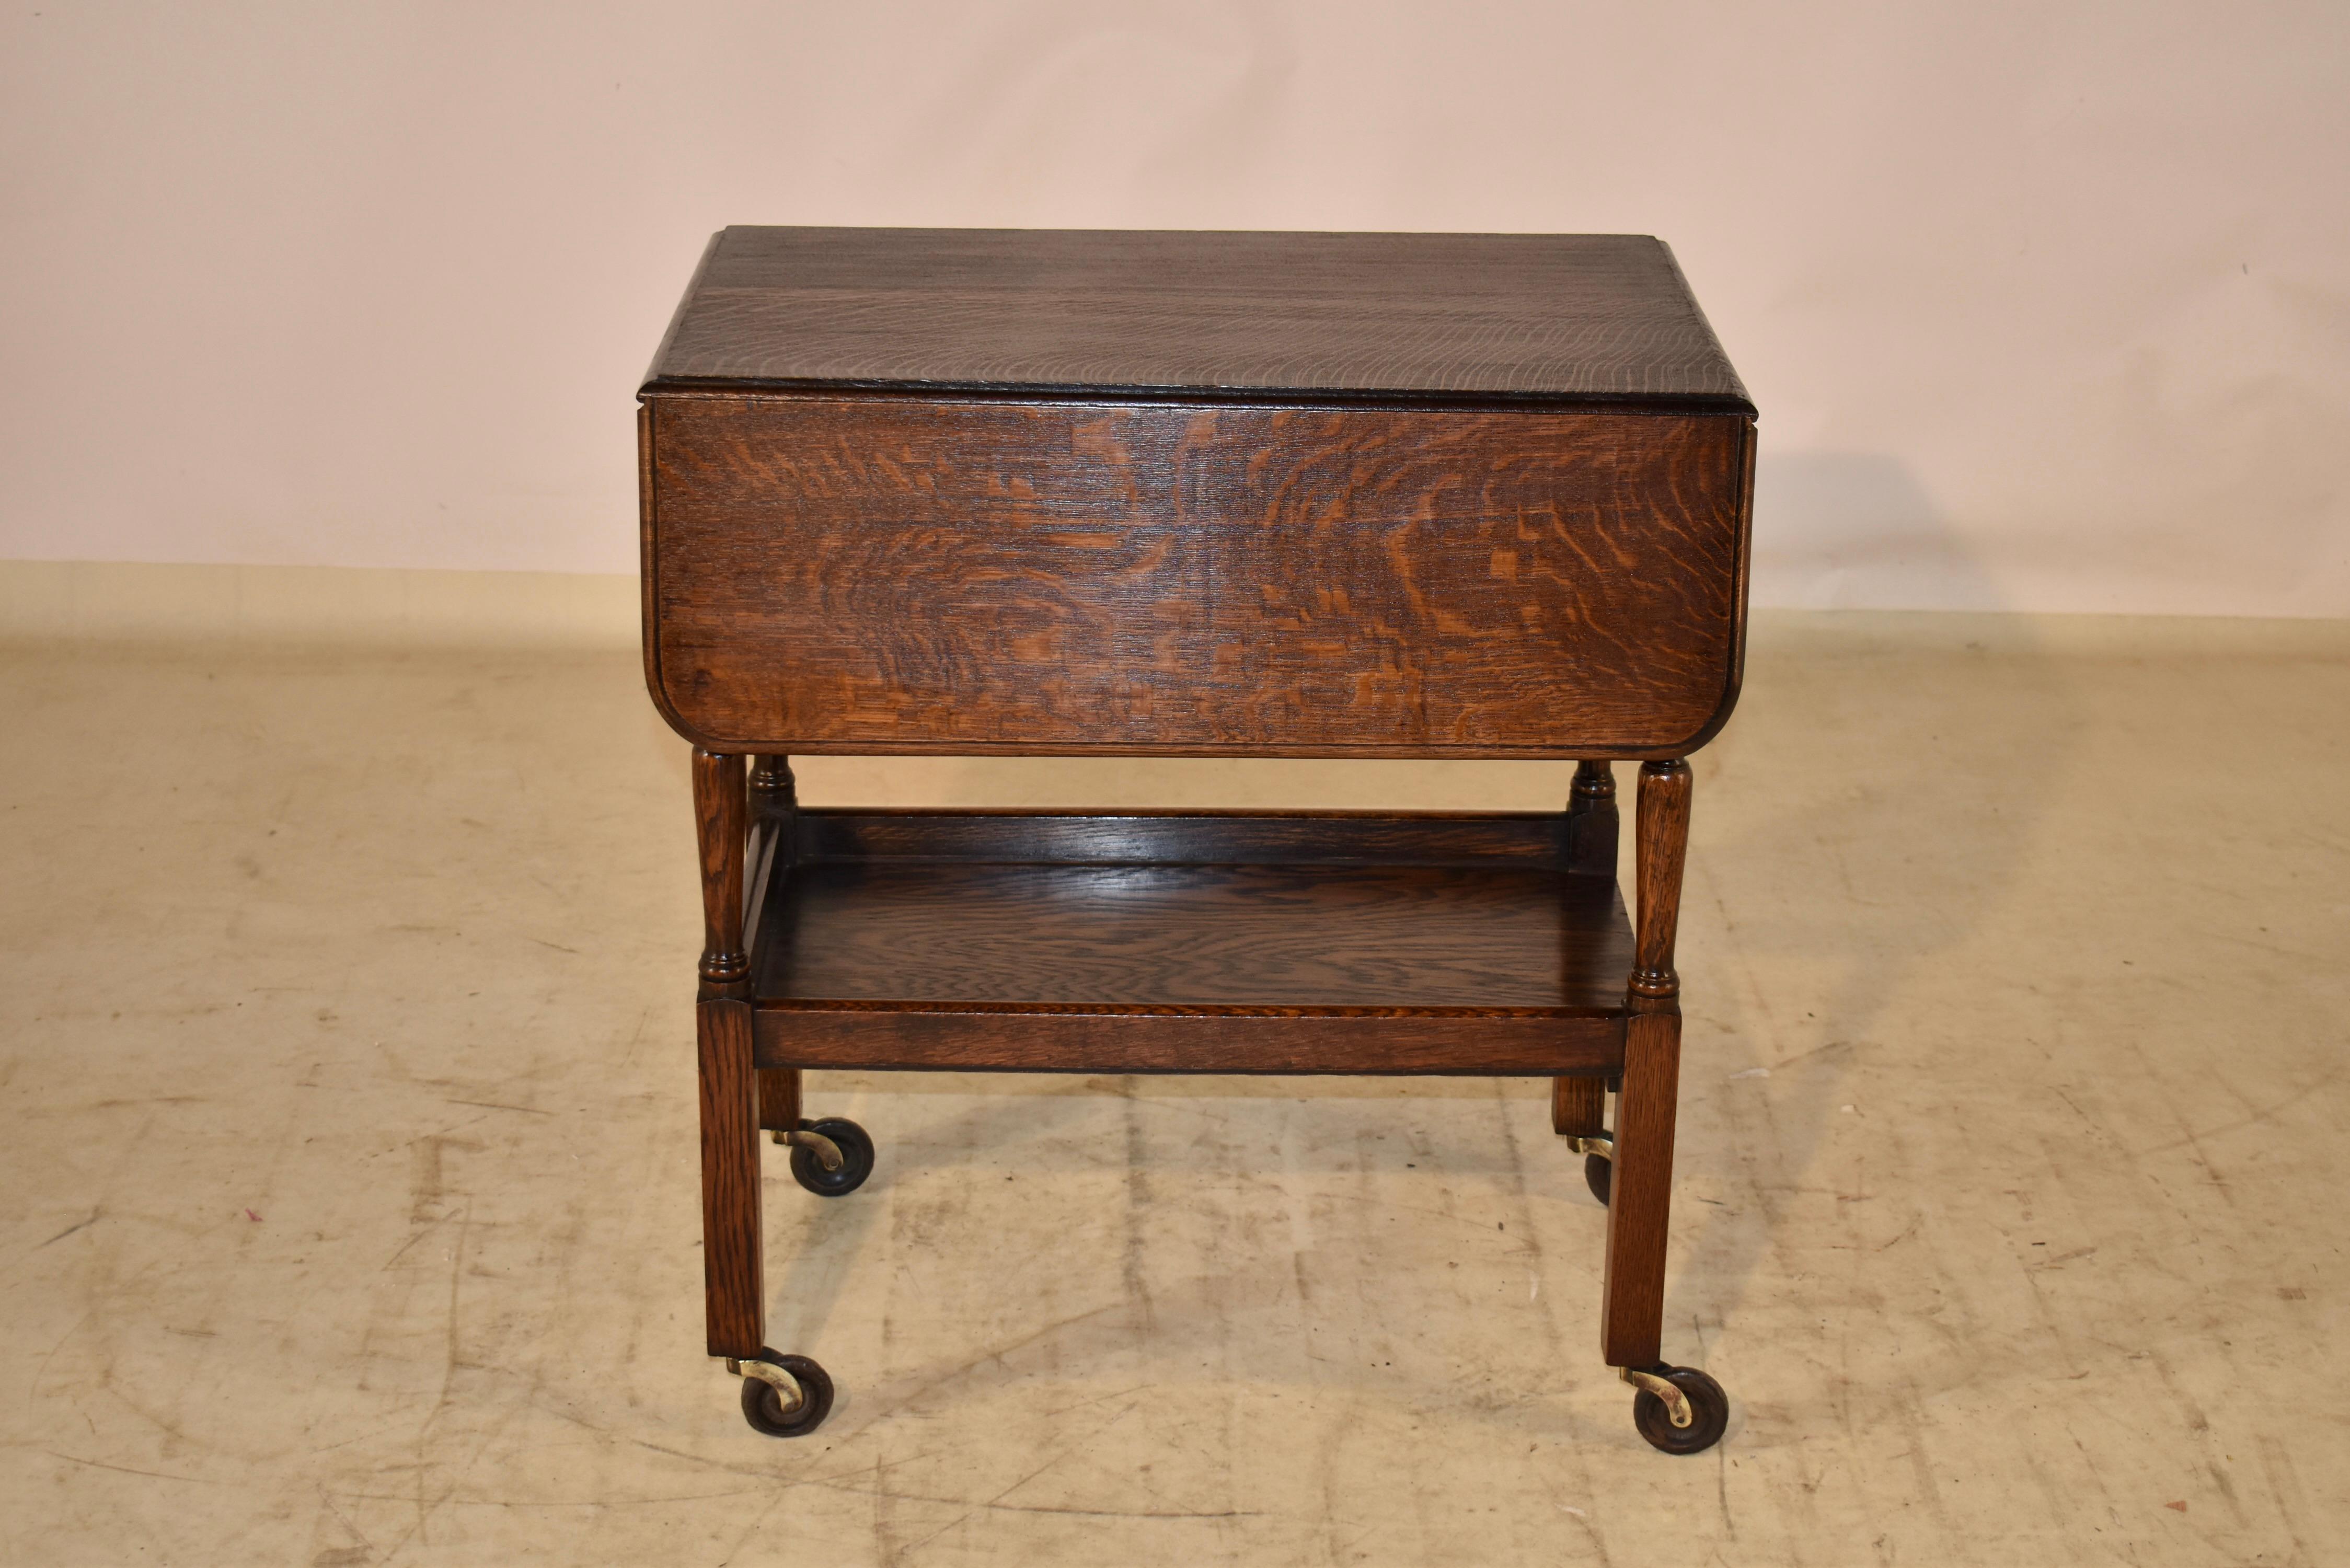 circa 1900 oak drink cart from England. The top has a beveled edge and two leaves. The leaves lift and turn to extend the table to Measure 33.5 inches x 26 inches when the leaves are up. The top has lovely graining and is supported on hand turned